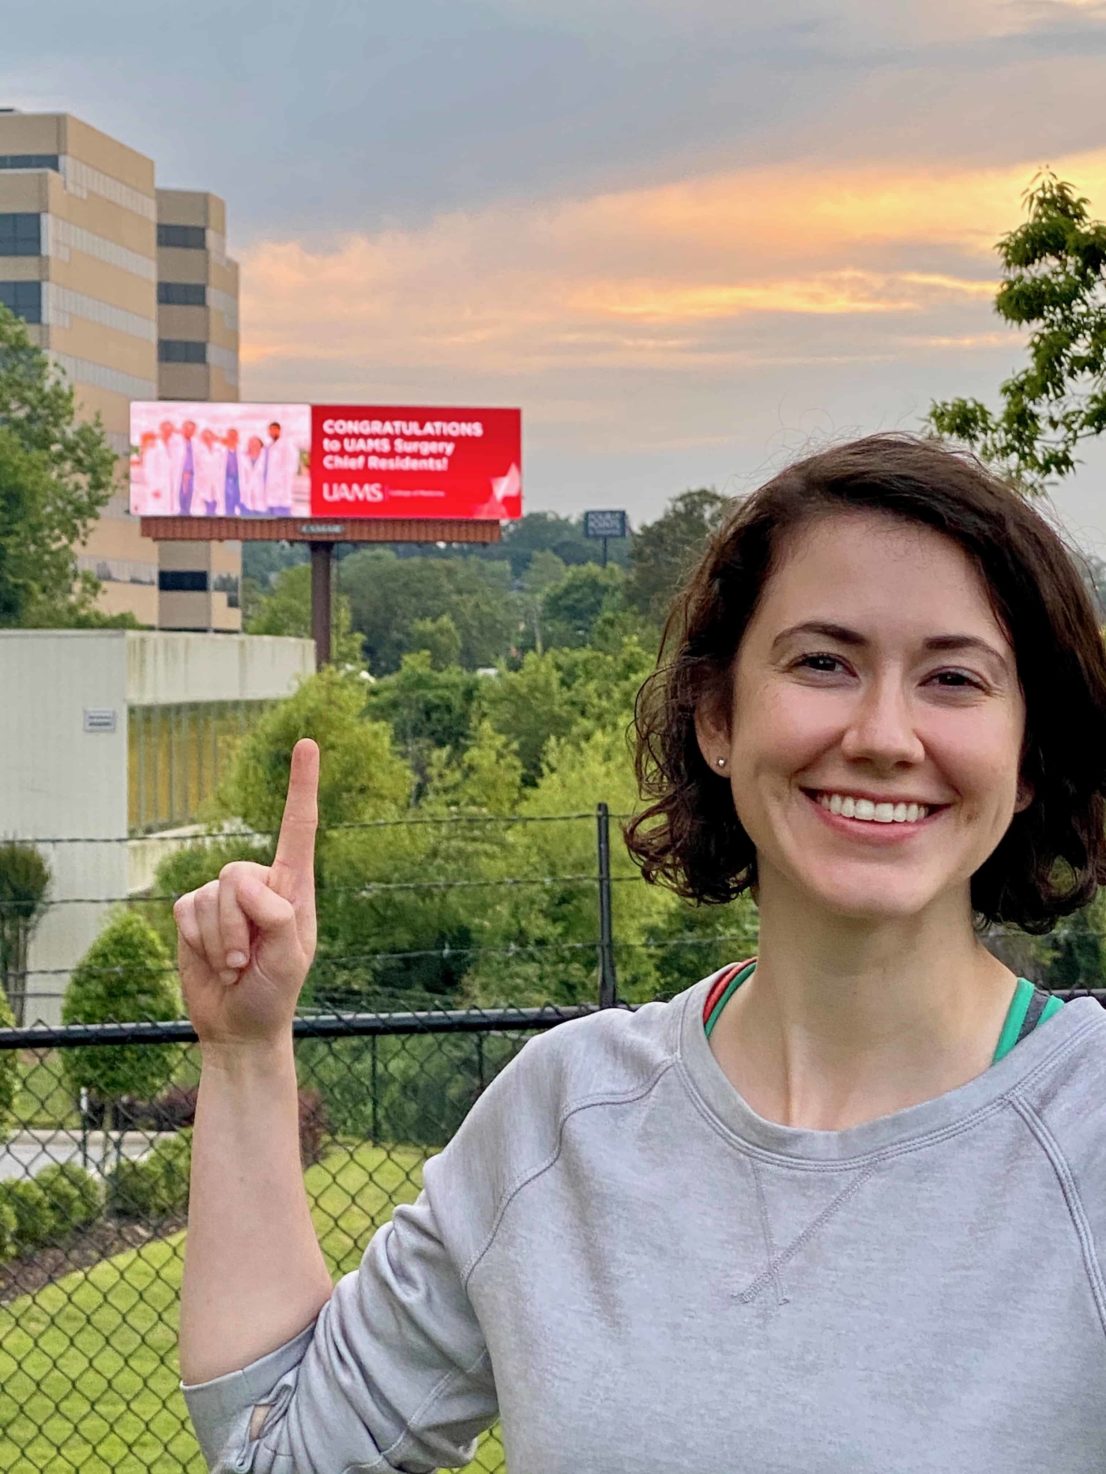 chief resident points to a billboard congratulating the chief residents